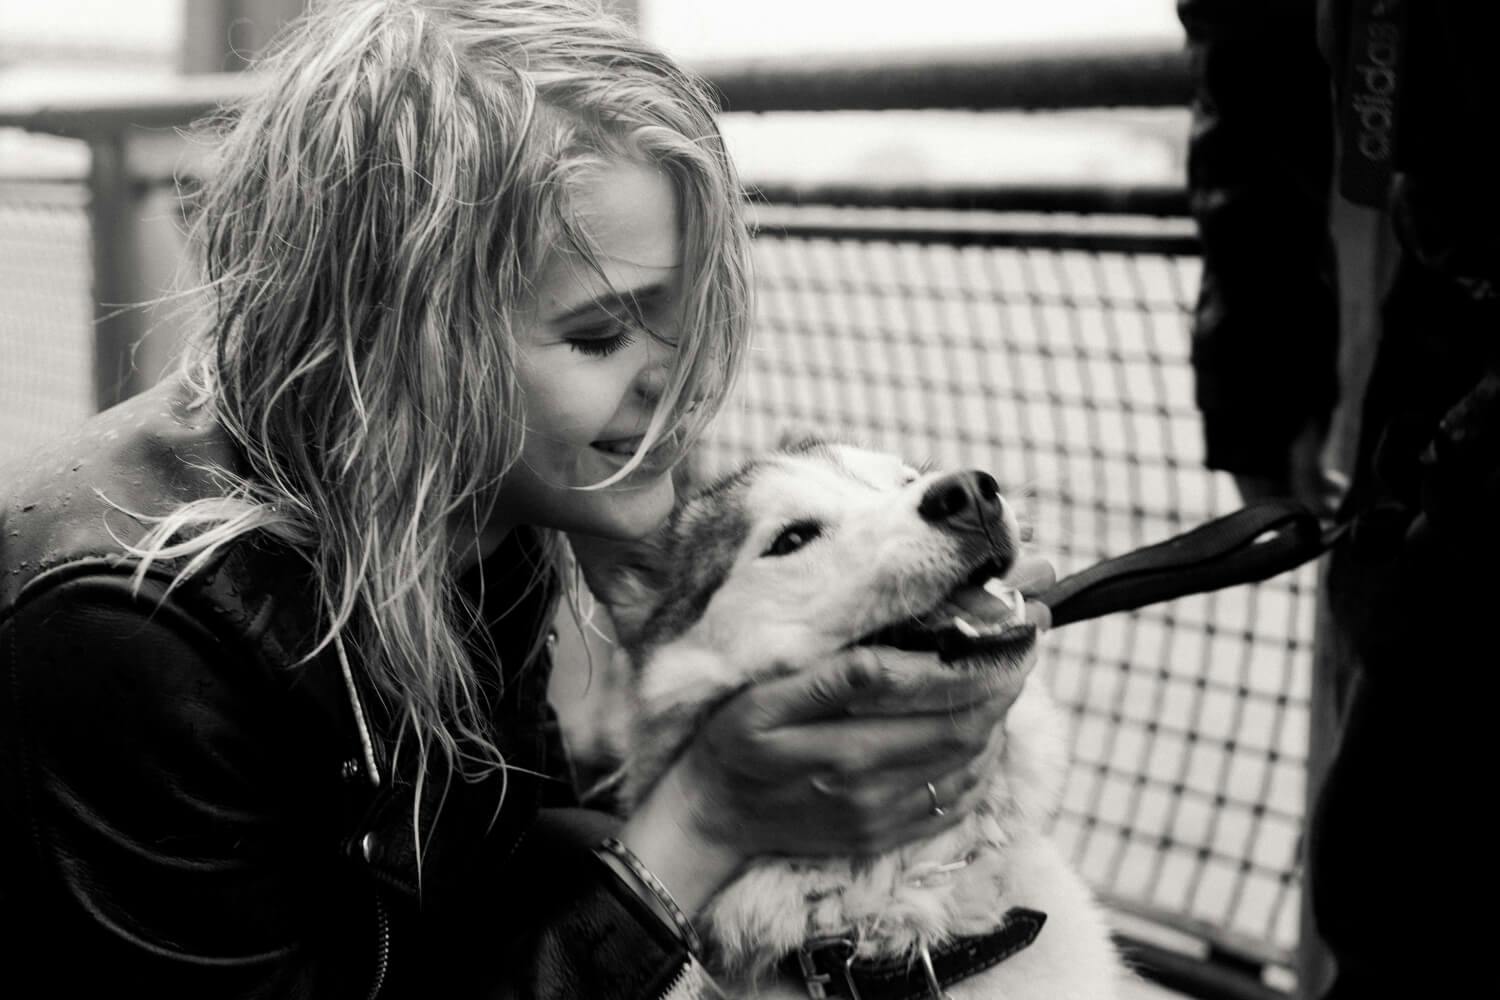 A young woman bending down to pet a smiling dog in a black and white photo